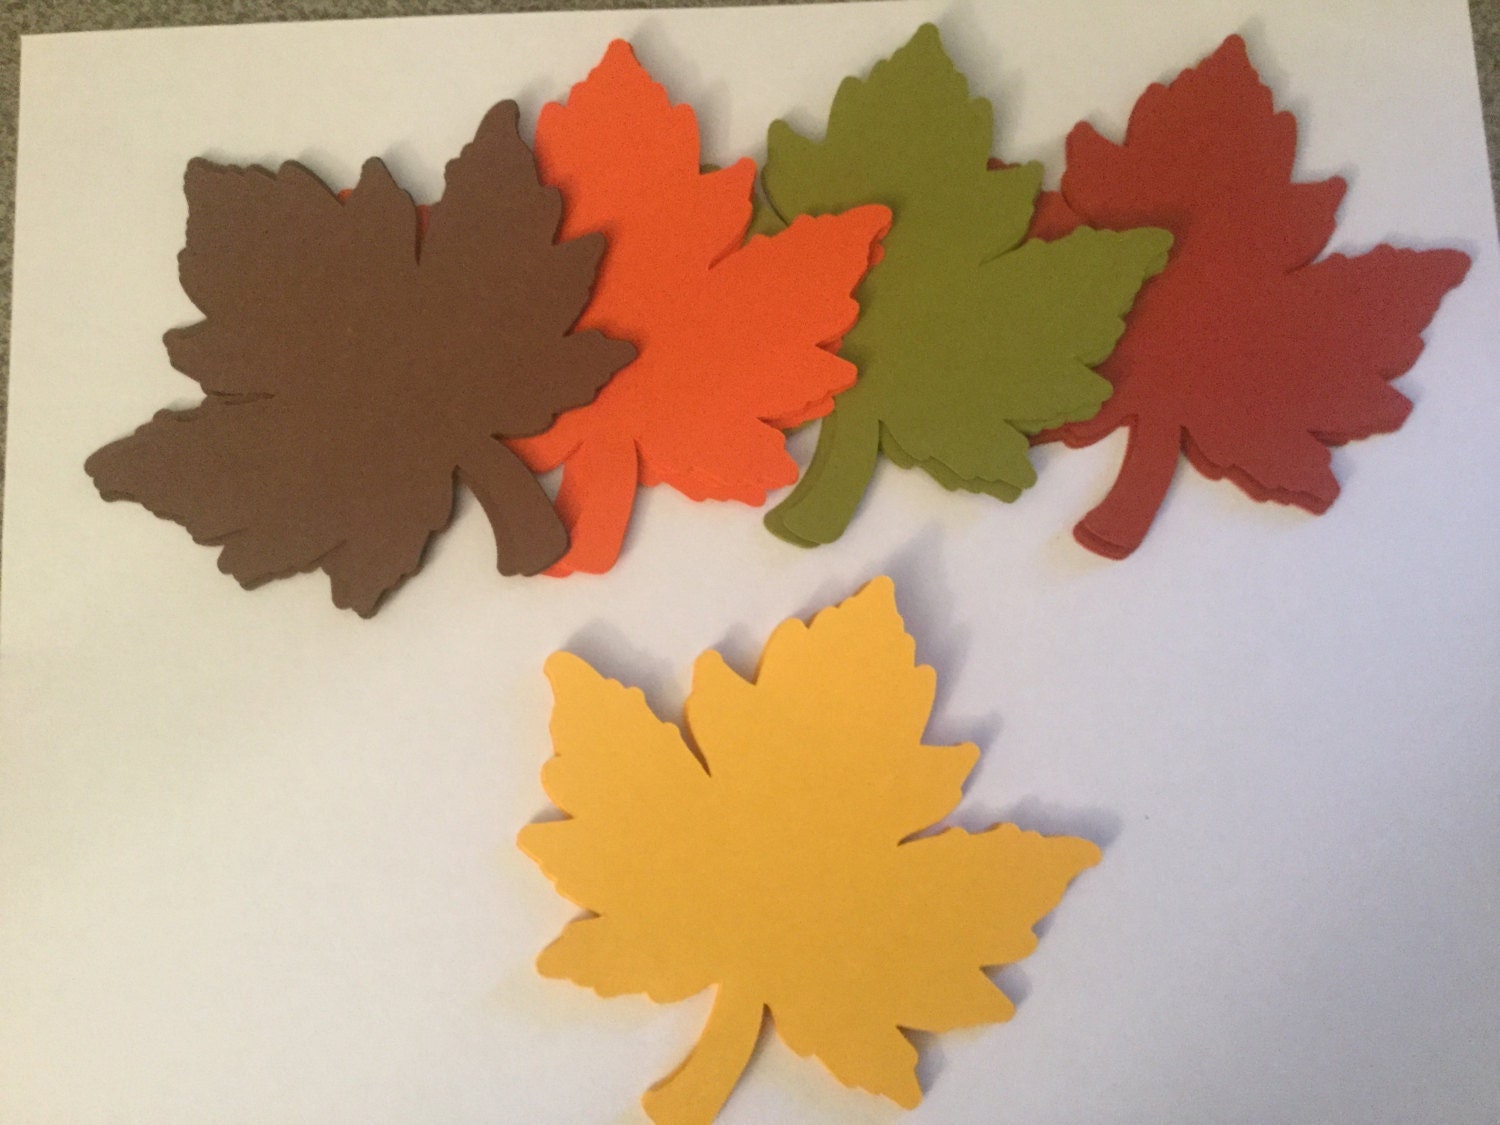 80 Pieces Unfinished Wood Cutouts Maple Leaves Wooden Crafts Fall Shap